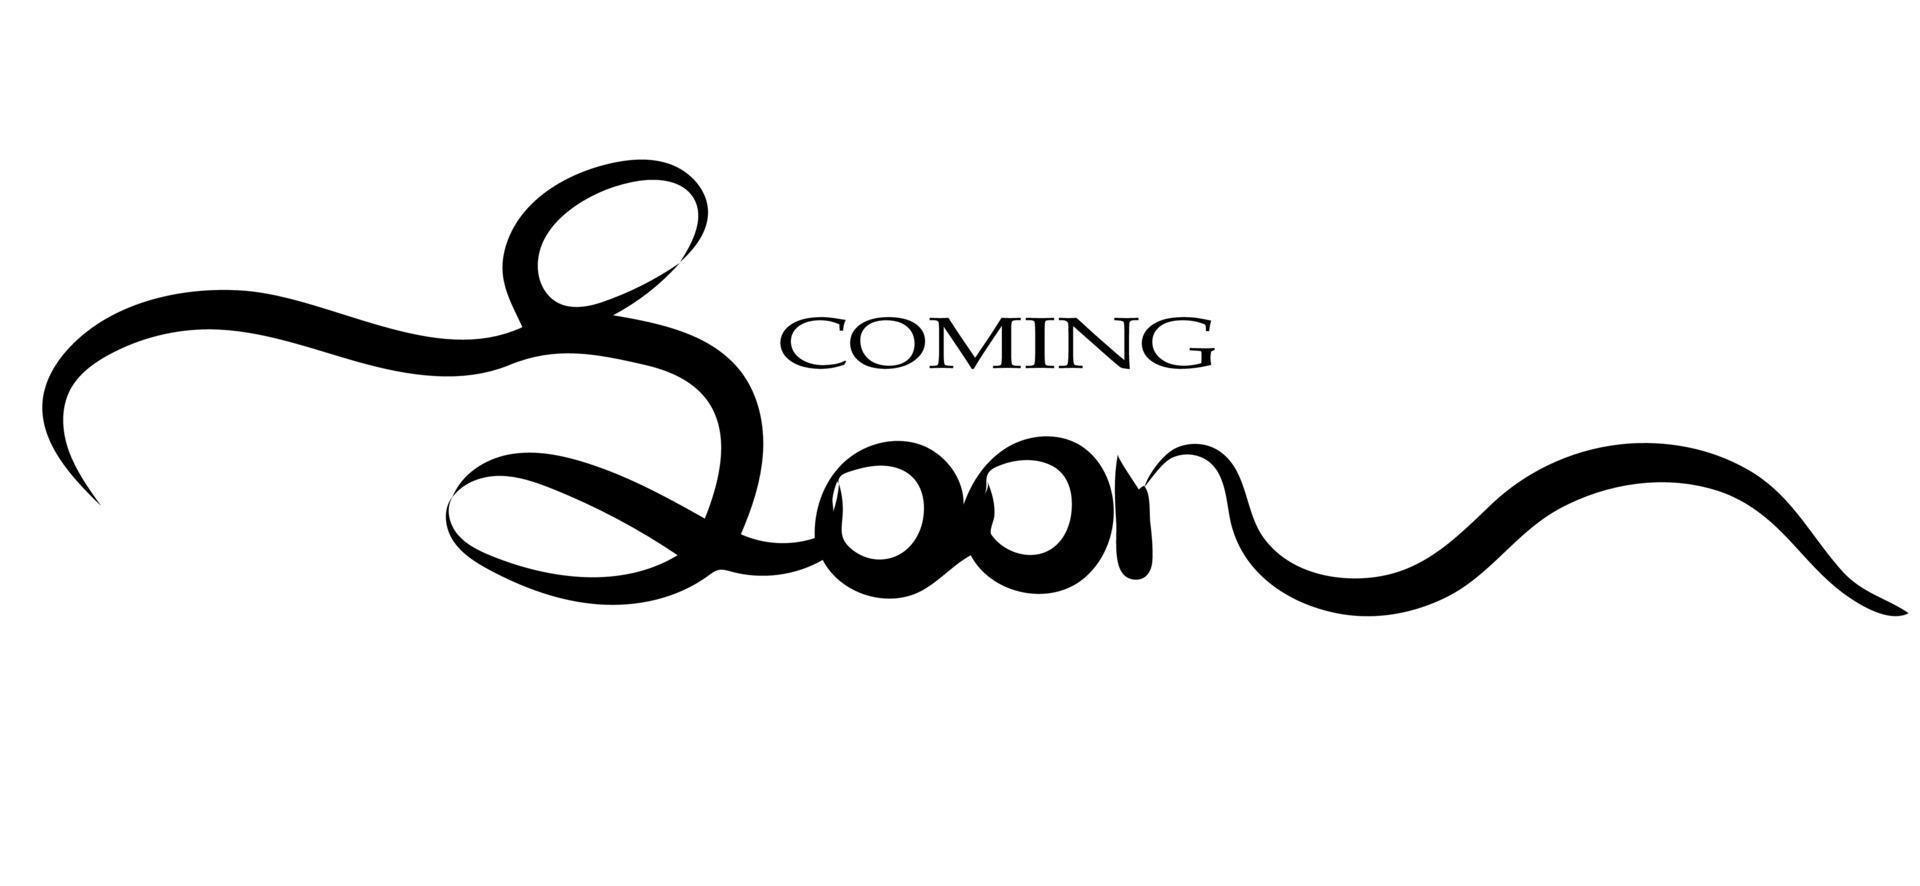 Coming soon hand drawn lettering phrase vector